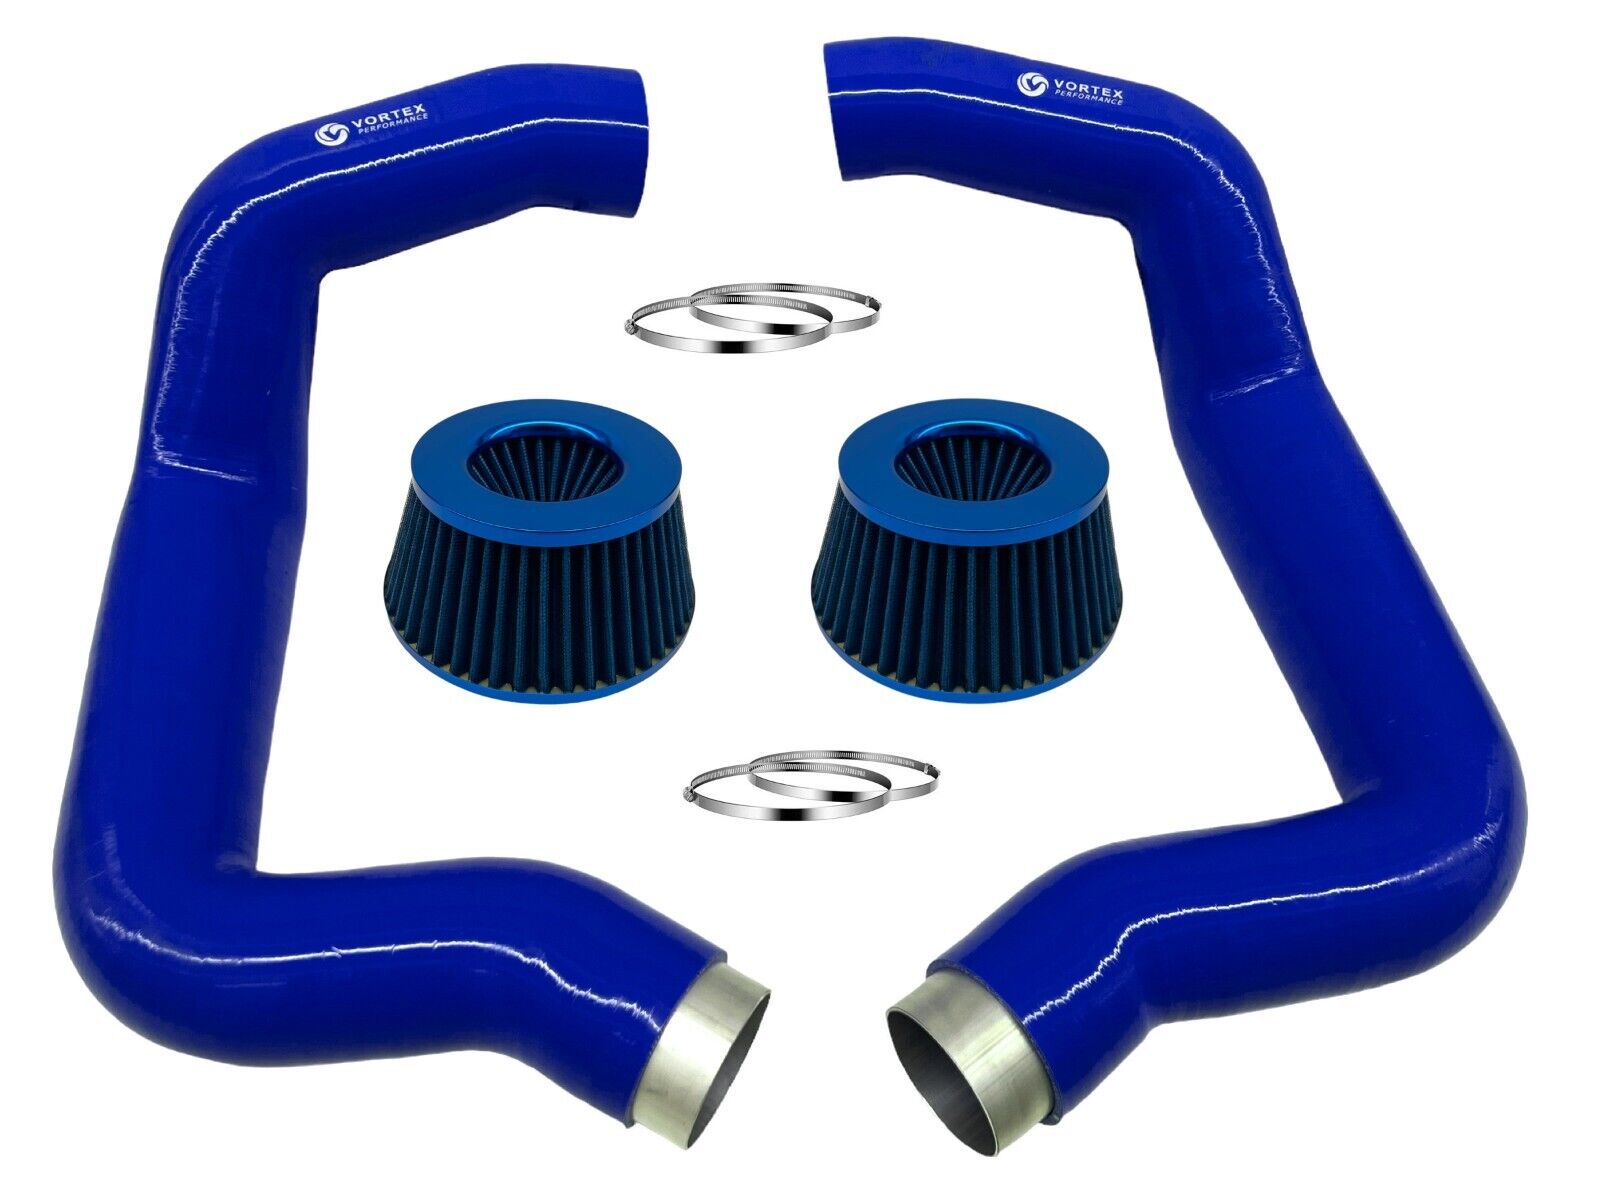 for BMW F90 M5 M8 G30 M550I Full Front Mount air intake - BLUE +2 BL air filters